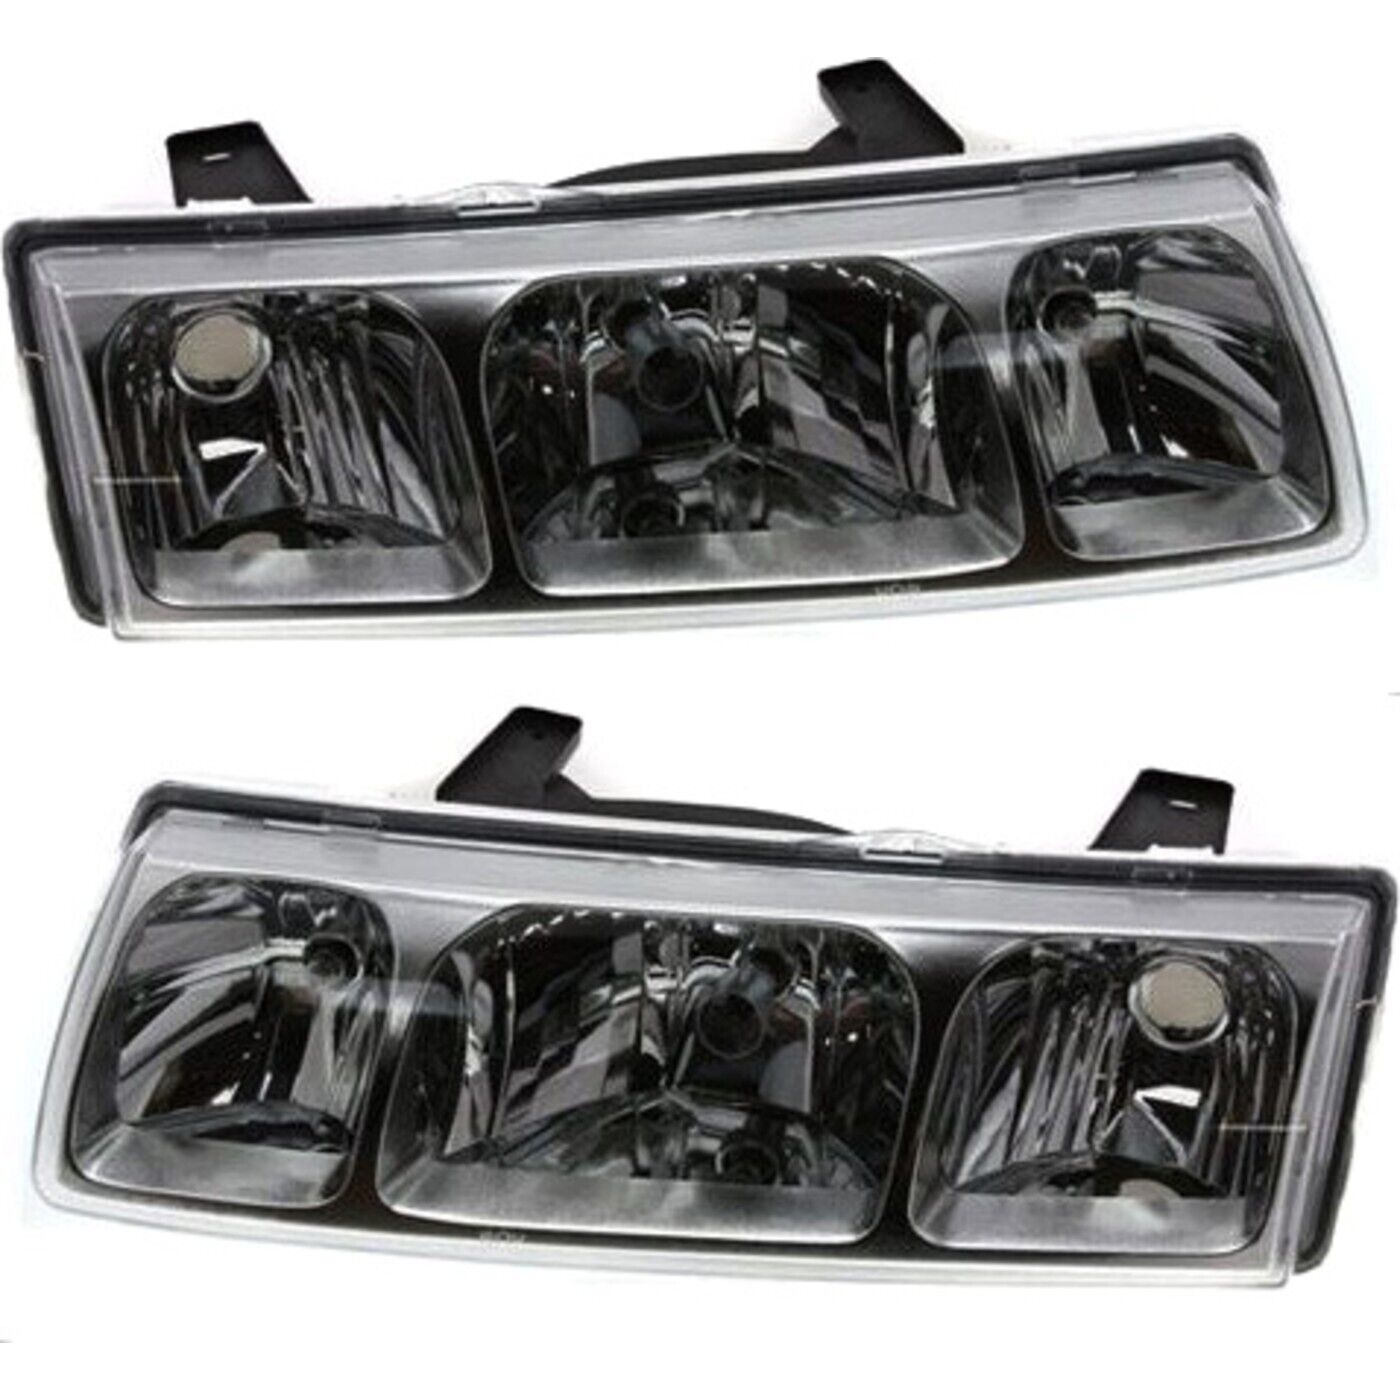 Headlights Headlamps Left & Right Pair Set NEW for 02-04 Saturn Vue